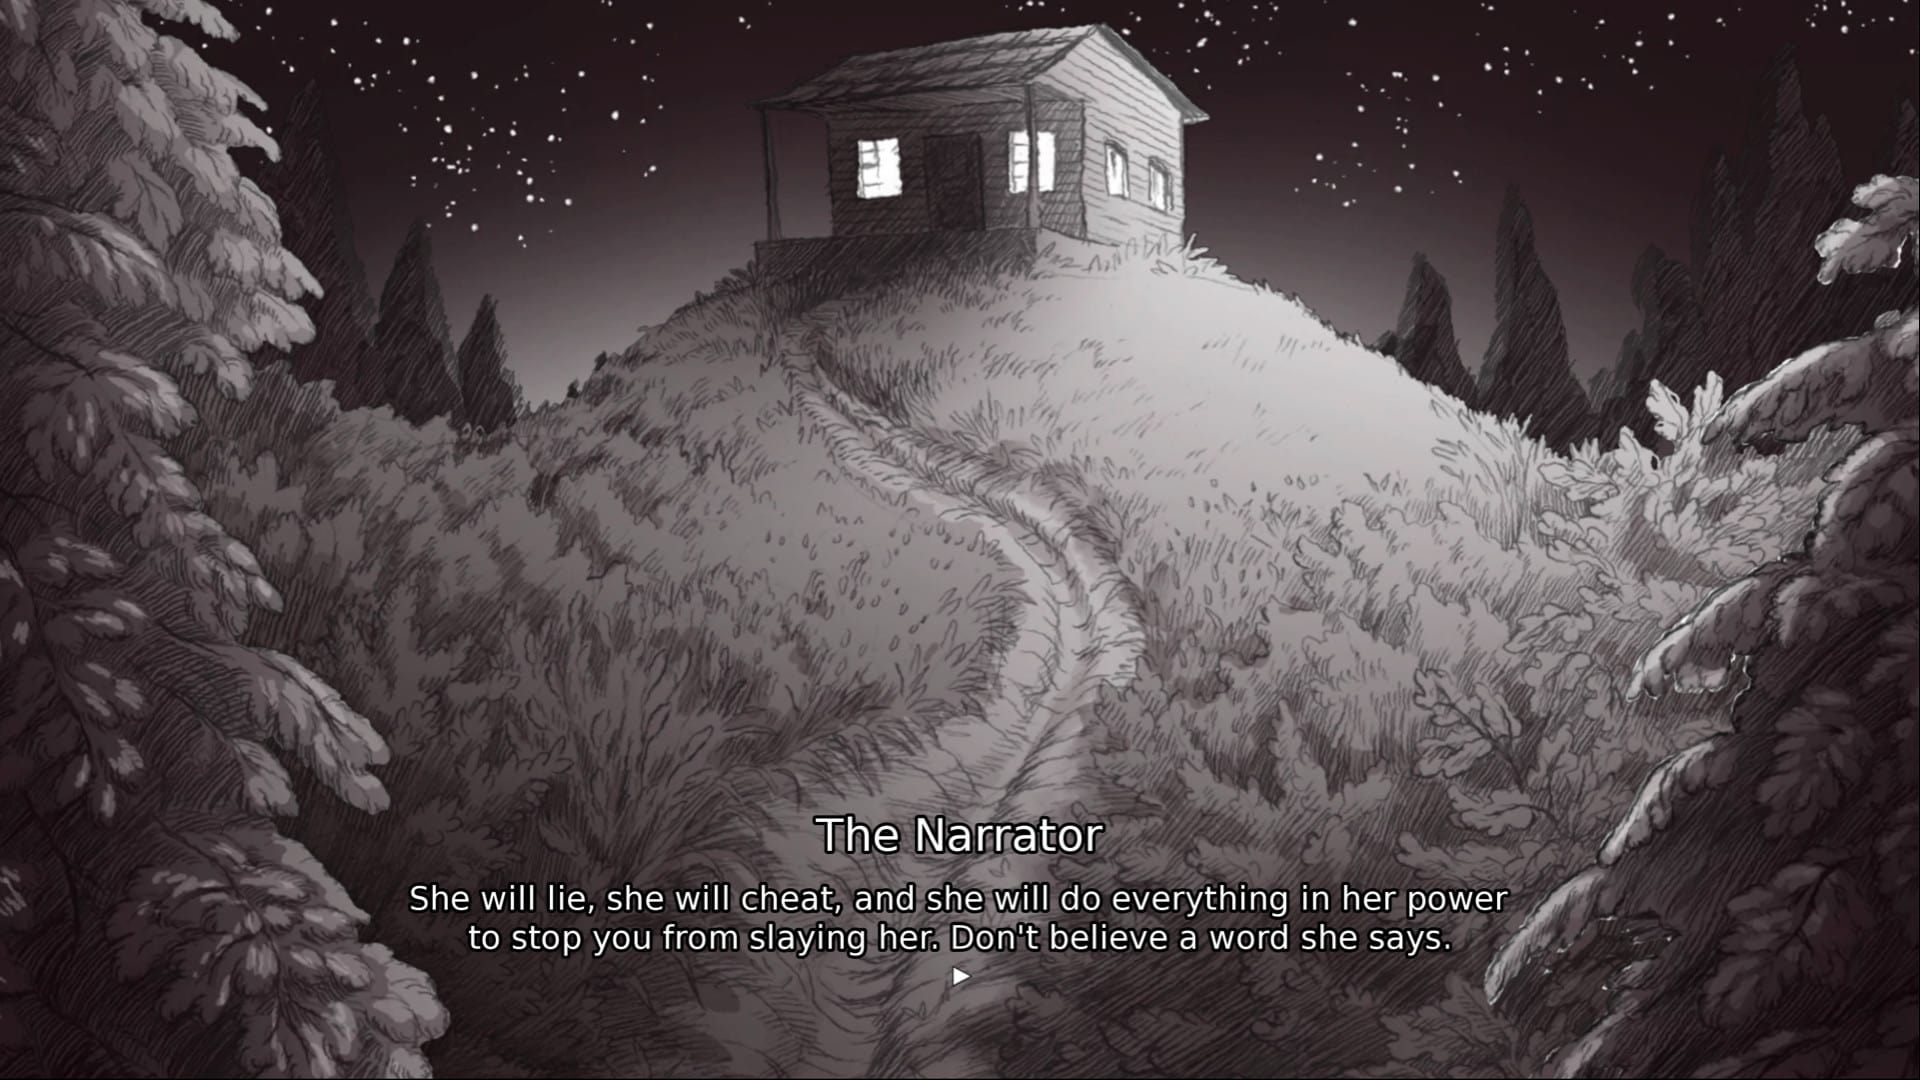 Screenshot of the cabin with the Narrator saying "she will lie, she will cheat, and she will do everything in her power to stop you from slaying her. Don't believe a word she says."